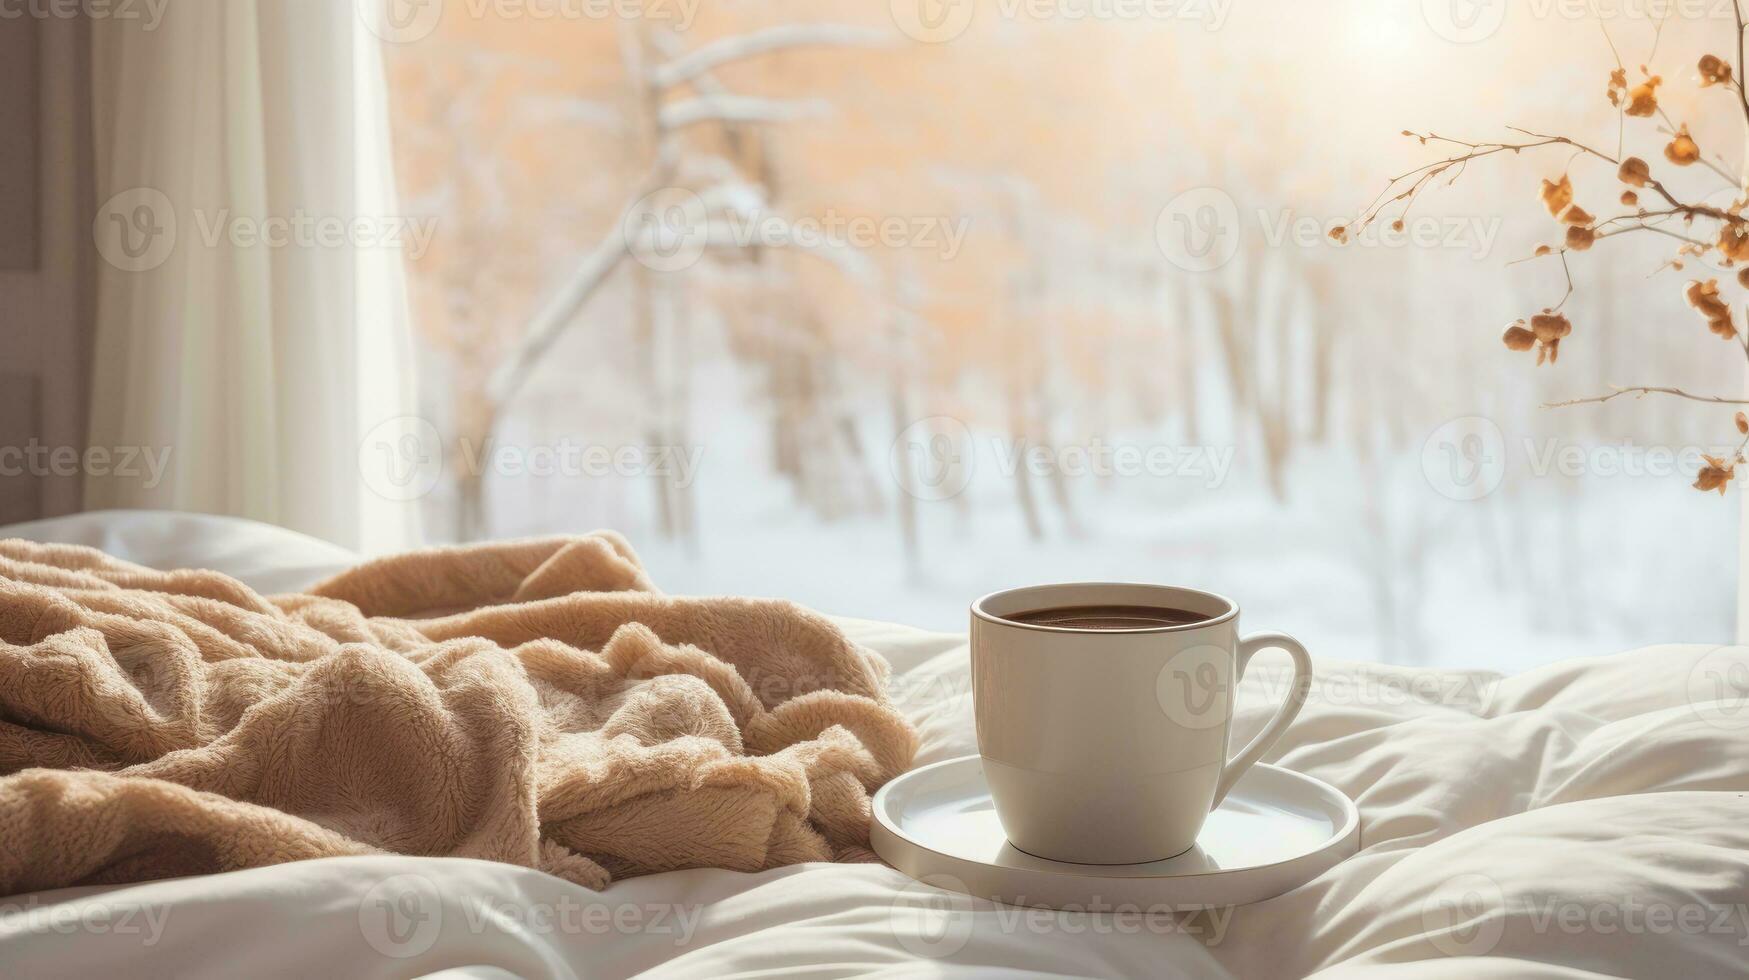 Cozy photo. A cup of coffee, a blanket by the window, winter photo